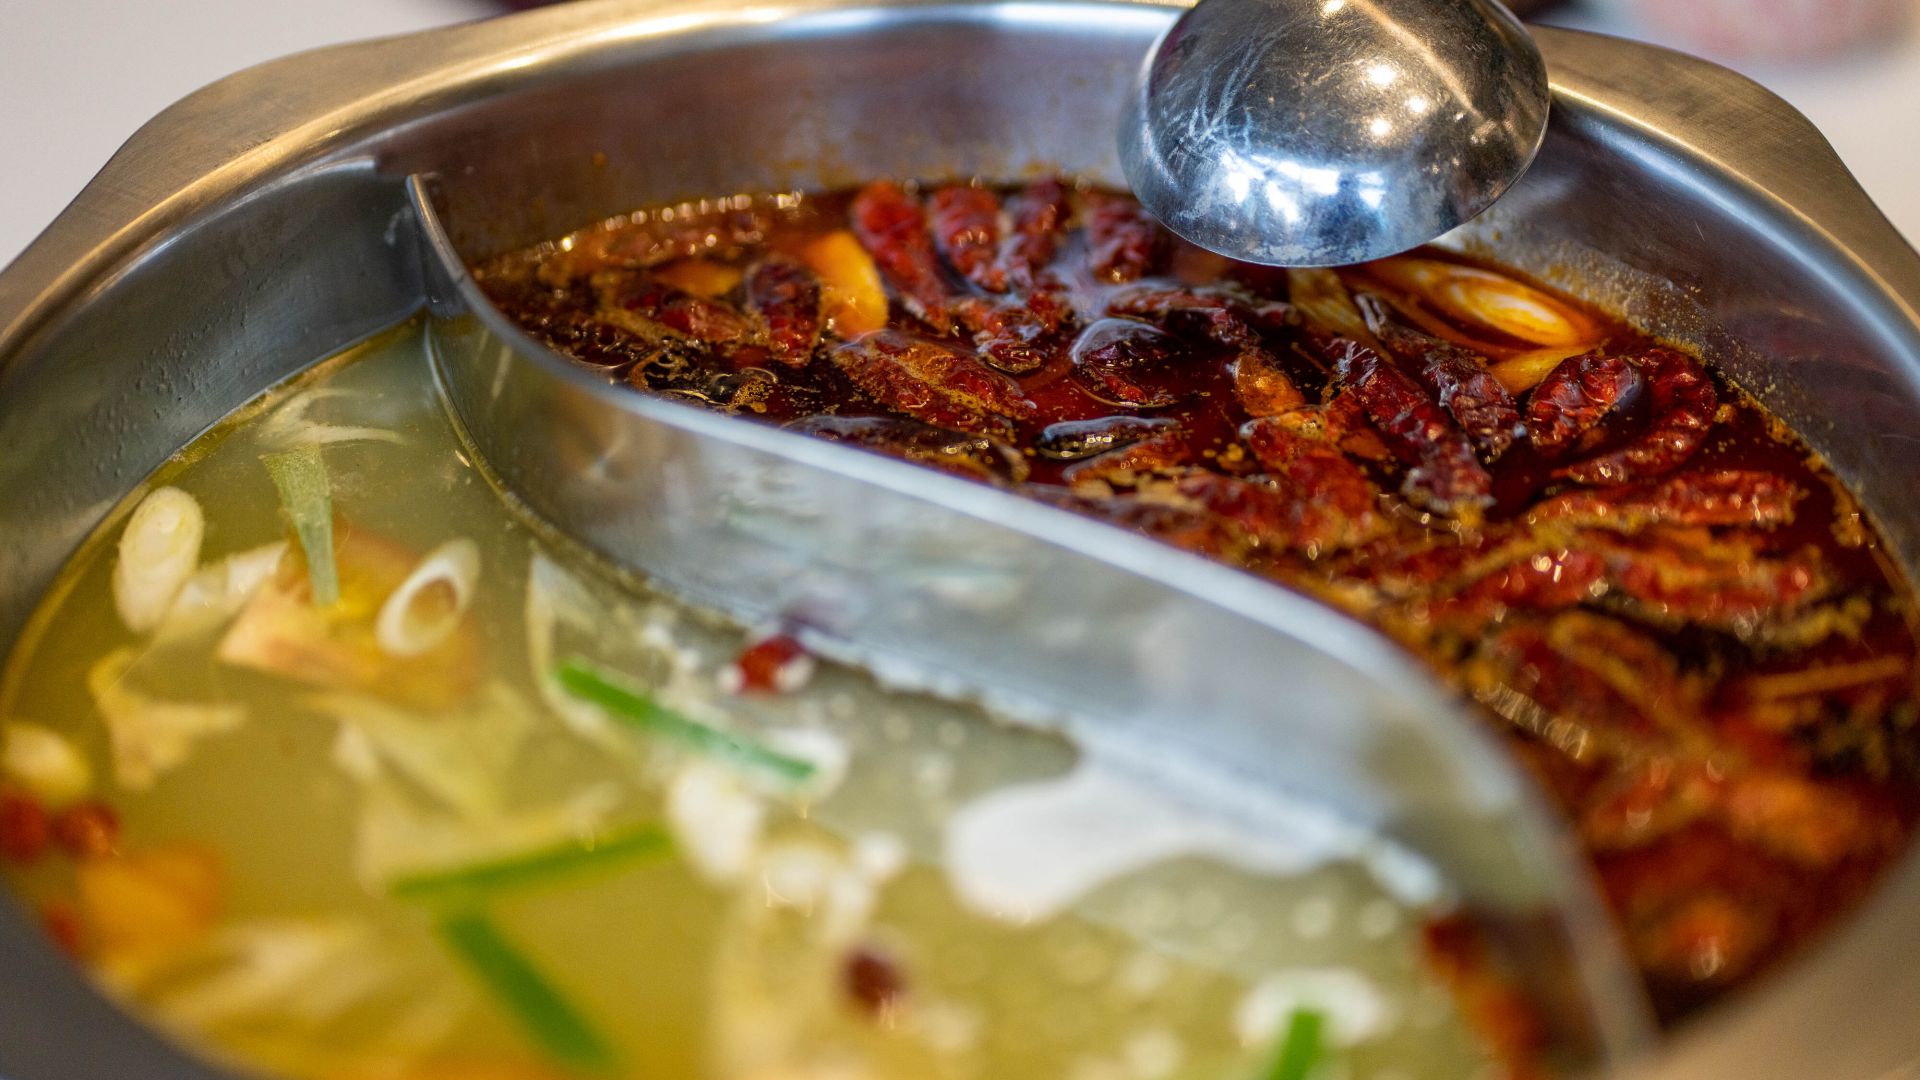 close view of the hotpot, one side is spicy, with chillis and peppers floating in the red broth, while the other is mild with veggies on a clear broth